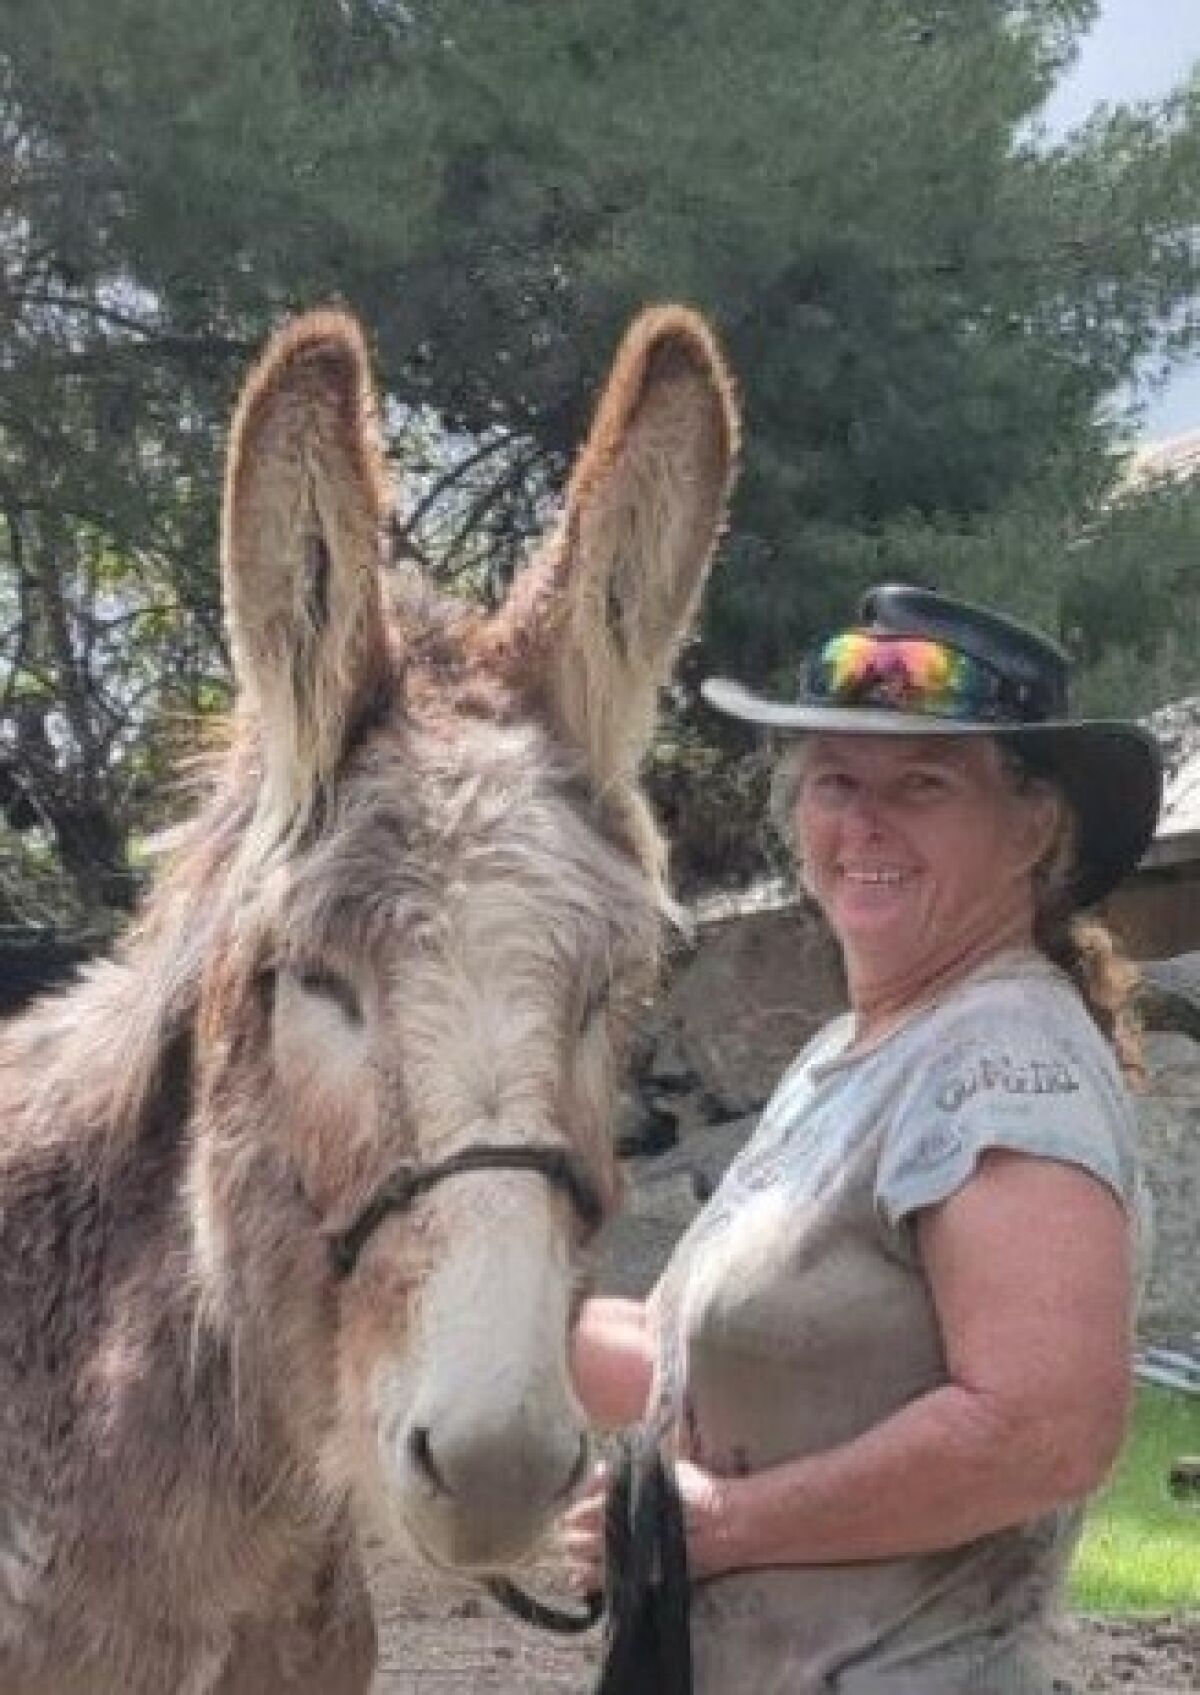 A woman in a cowboy hat stands next to a donkey.